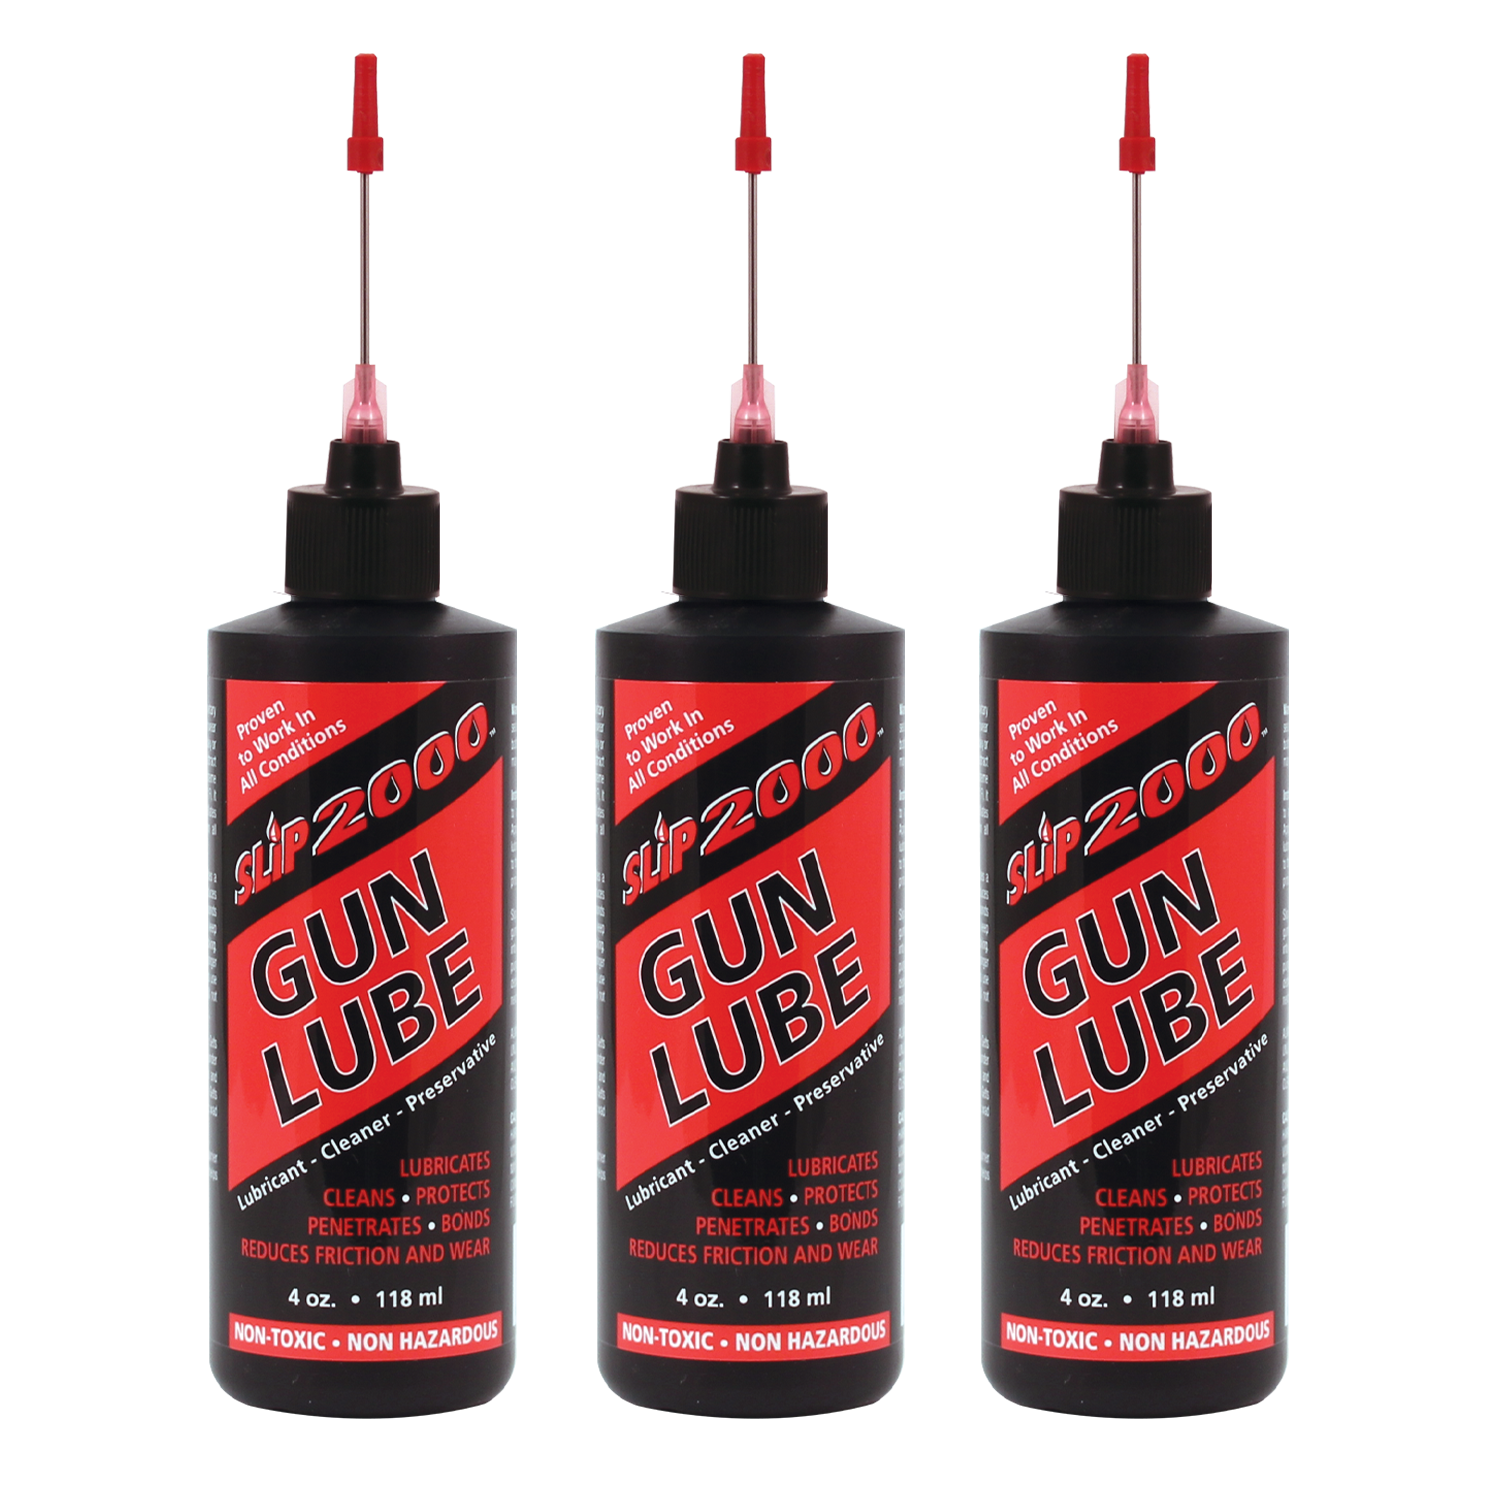 4oz. Empty Gun Lube Bottles with Metal Needle Tips - 3 Pack